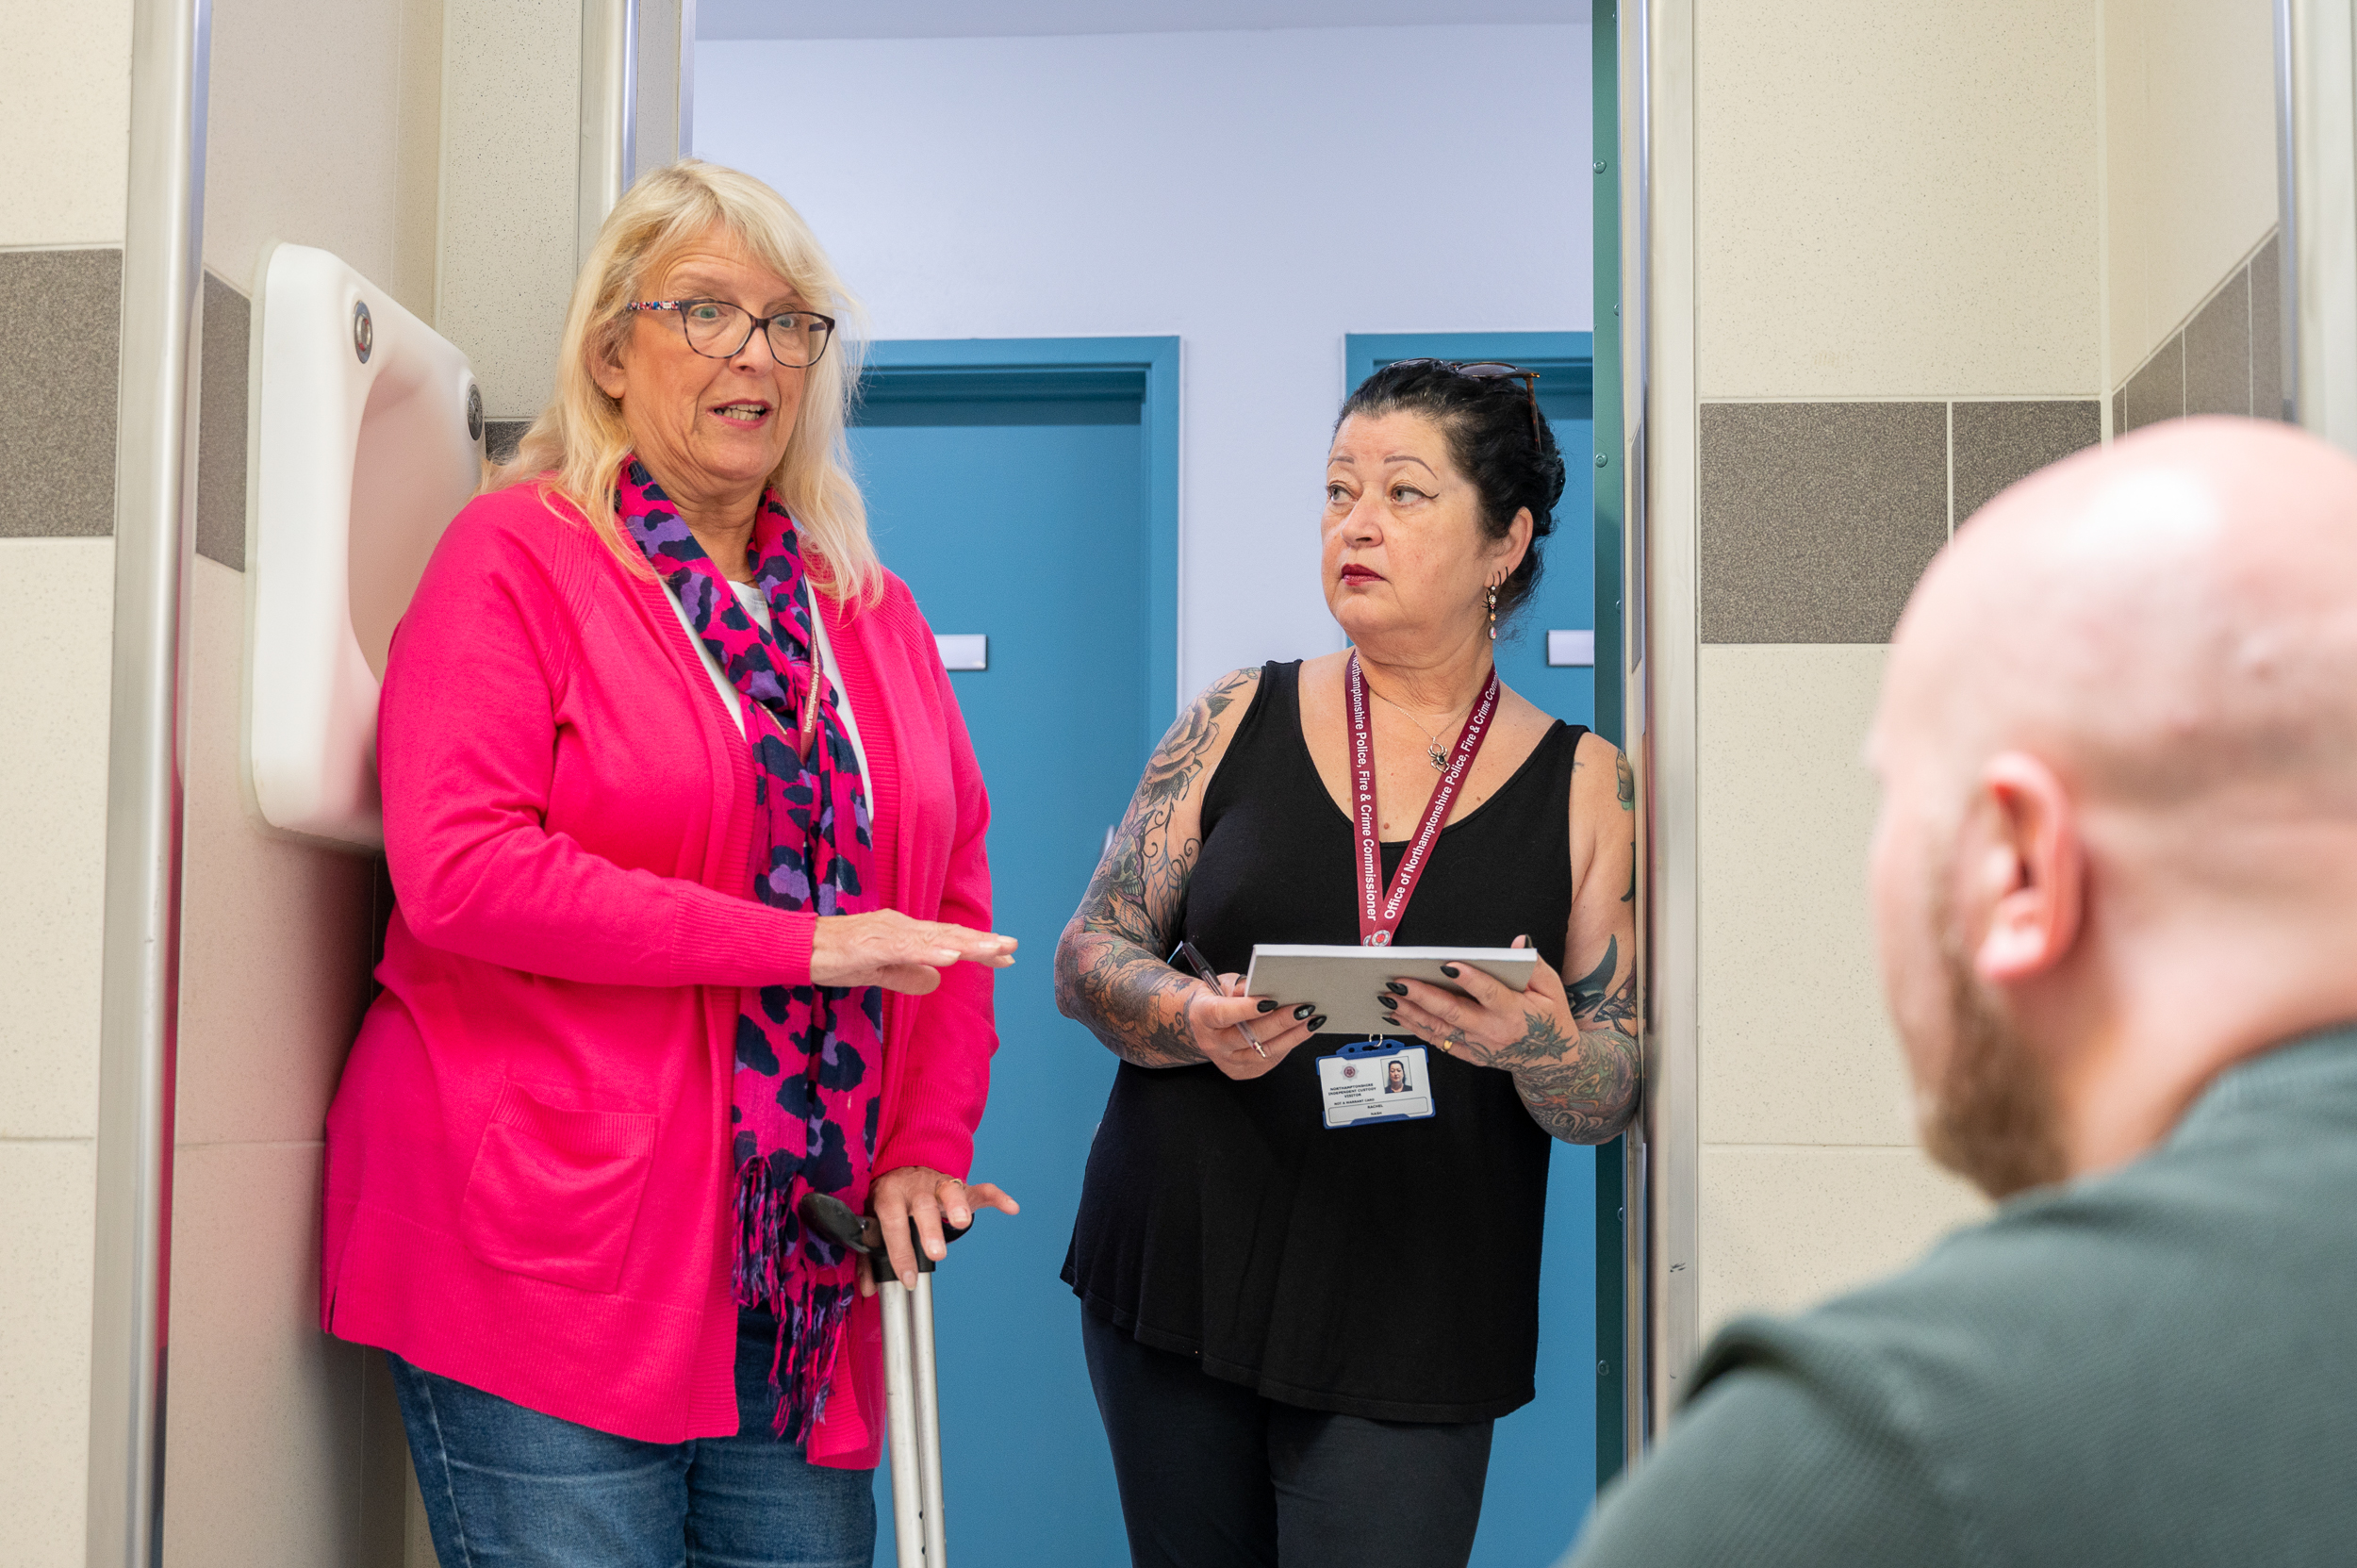 Independent Custody Volunteers Catherine Broughton (left in pink jacket) and Rachel Nash (right in black top with clipboard) speak to a person in a green jumper who is in custody at the Criminal Justice Centre in Northampton